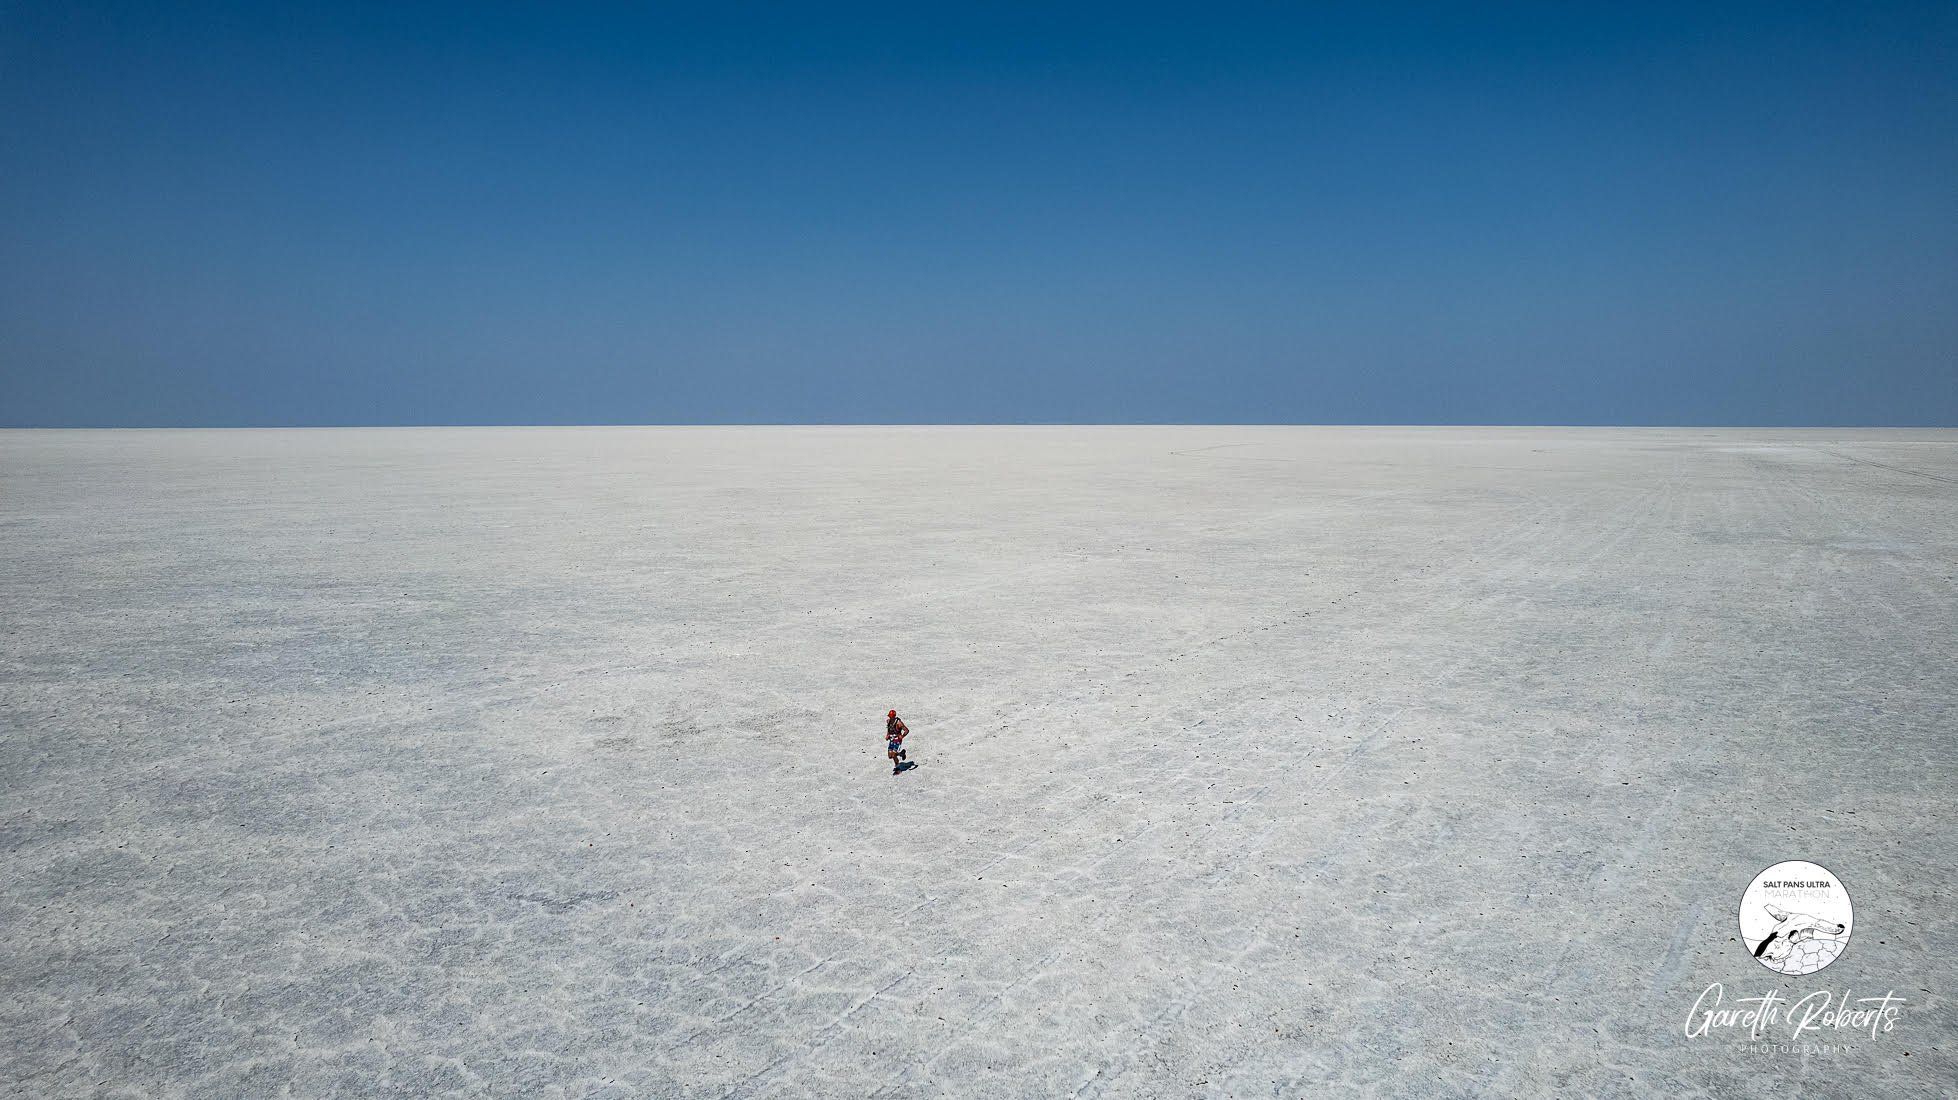 A runner cuts a lonely figure in the unique landscape of the Salt Pans Ultra.